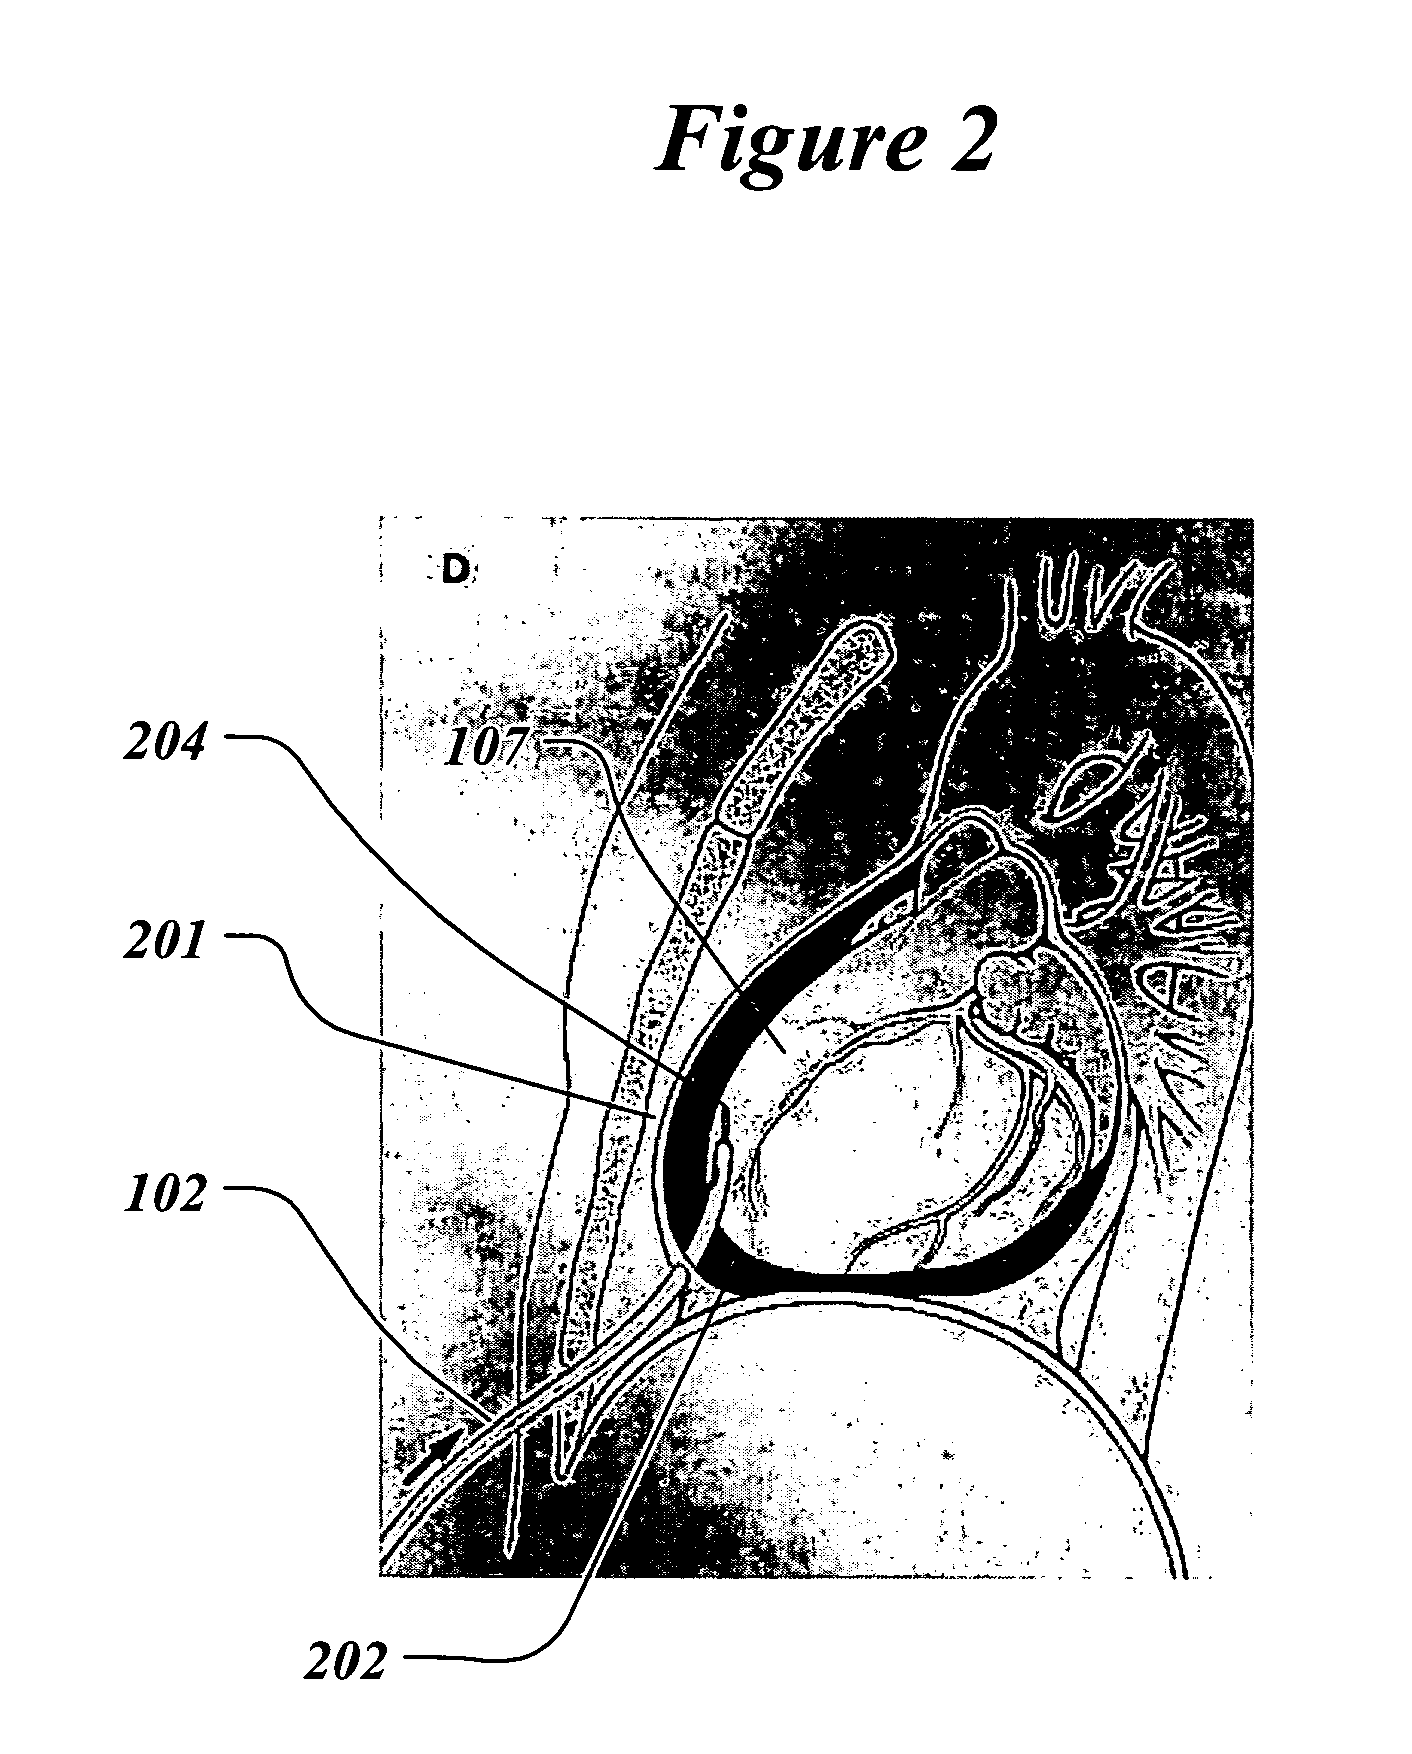 Method and system to treat and prevent myocardial infarct expansion